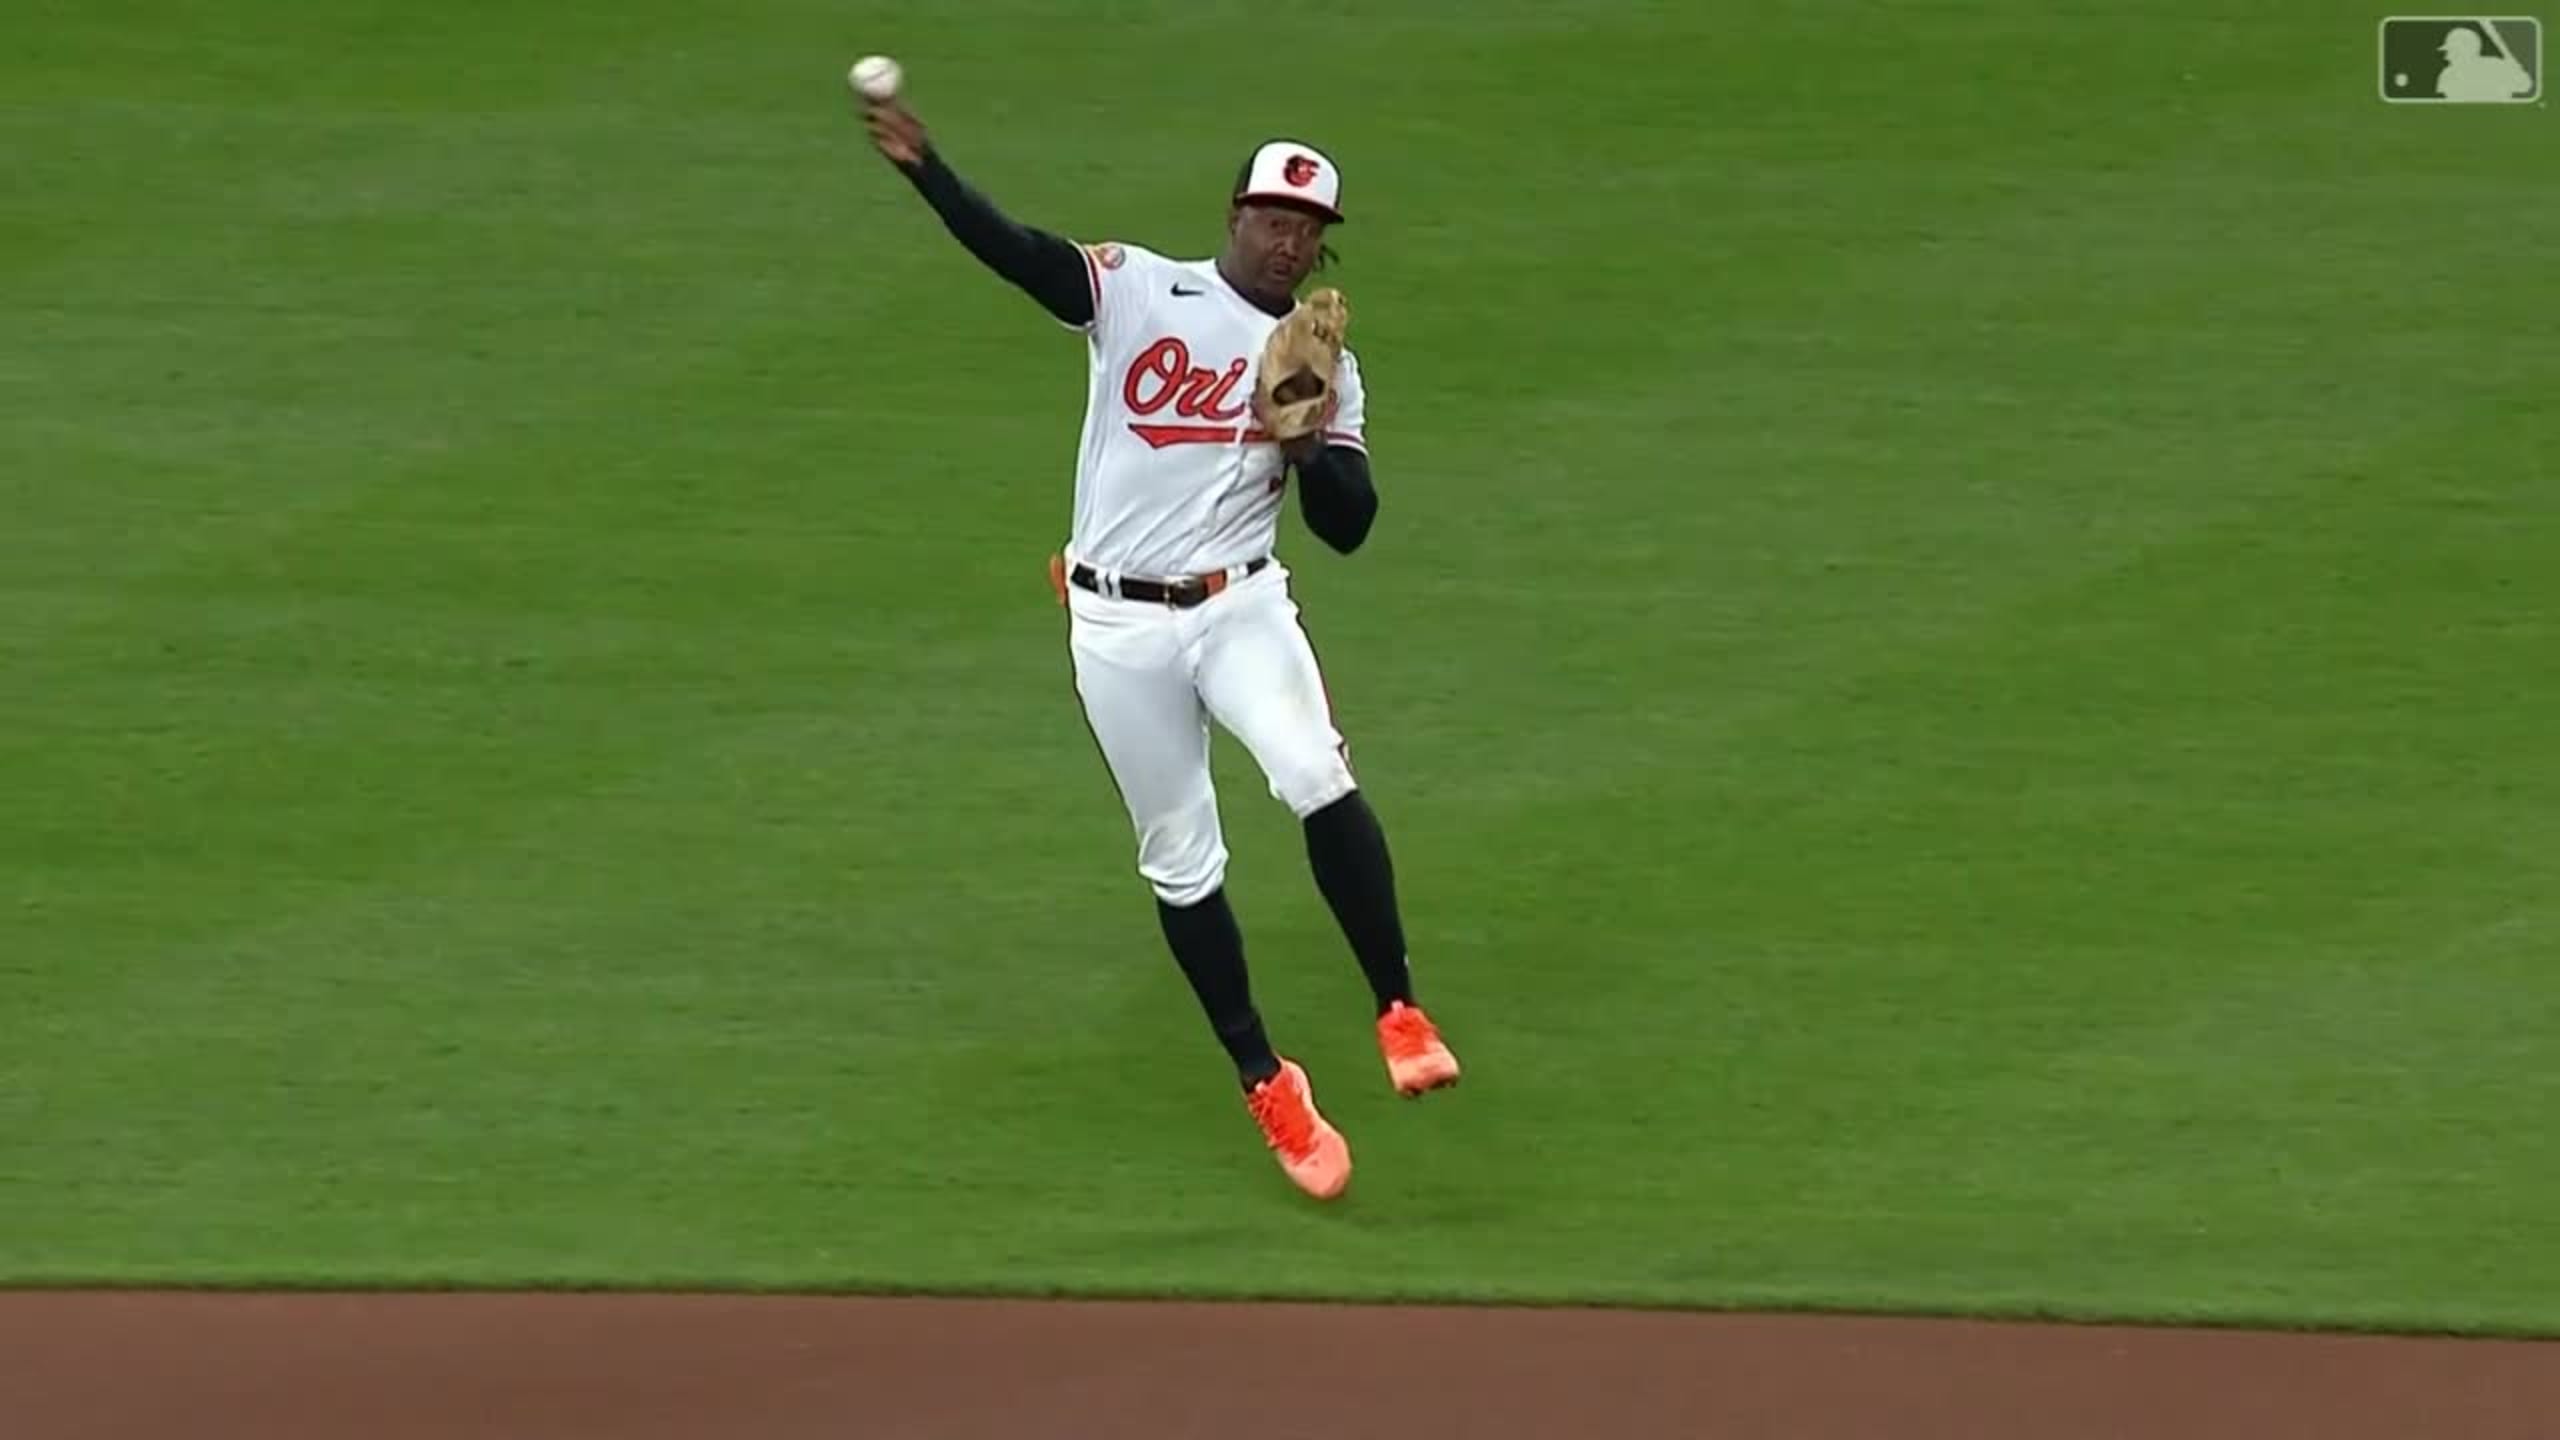 The O's Jorge Mateo takes a spot among the best shortstops in the AL - Blog